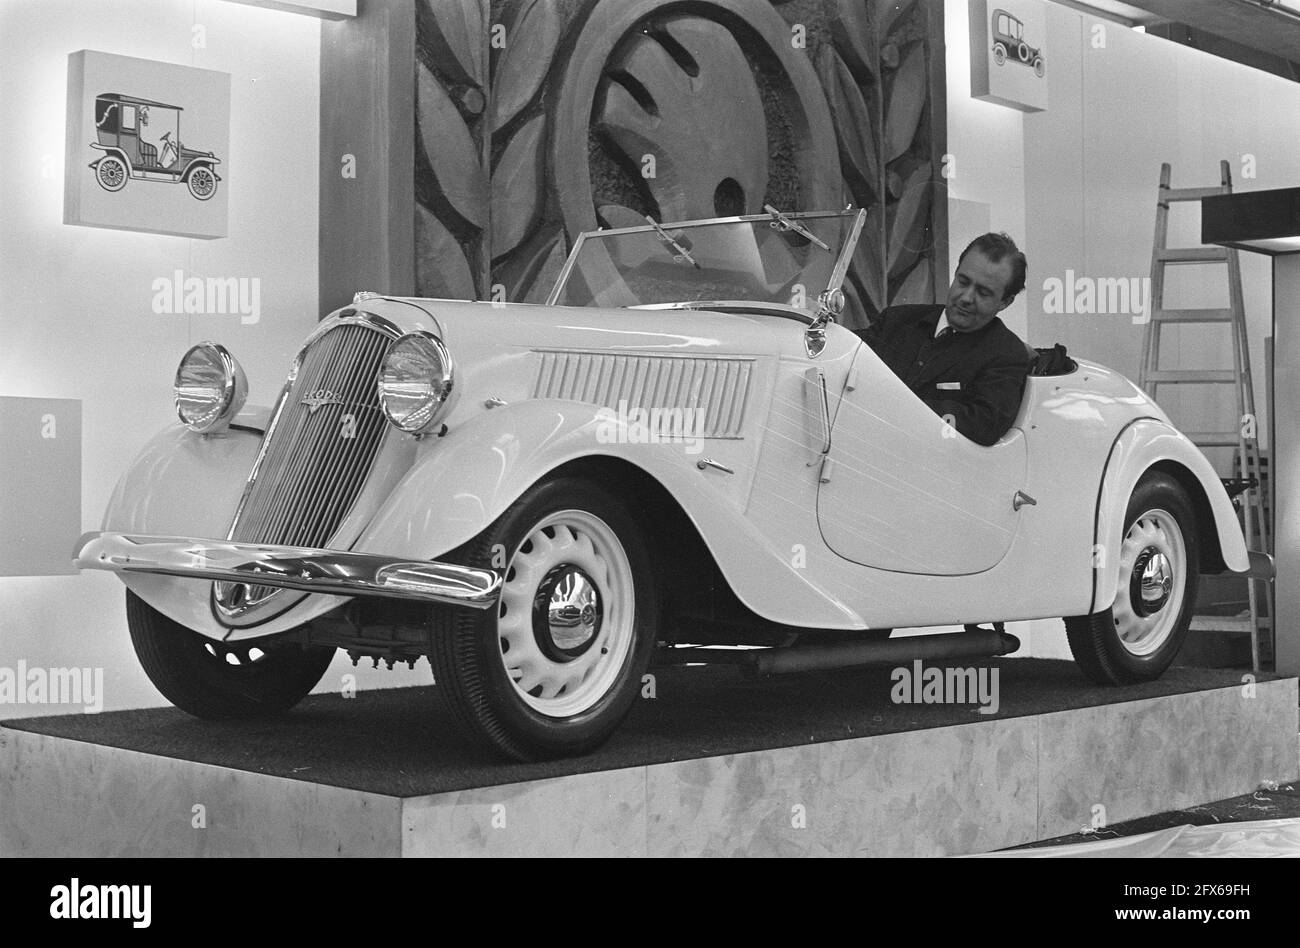 Next Thursday 58th RAI exhibition of passenger cars begins. The oldest car at the exhibition a Skoda from 1934, February 11, 1969, cars, car trade, fairs, exhibitions, The Netherlands, 20th century press agency photo, news to remember, documentary, historic photography 1945-1990, visual stories, human history of the Twentieth Century, capturing moments in time Stock Photo